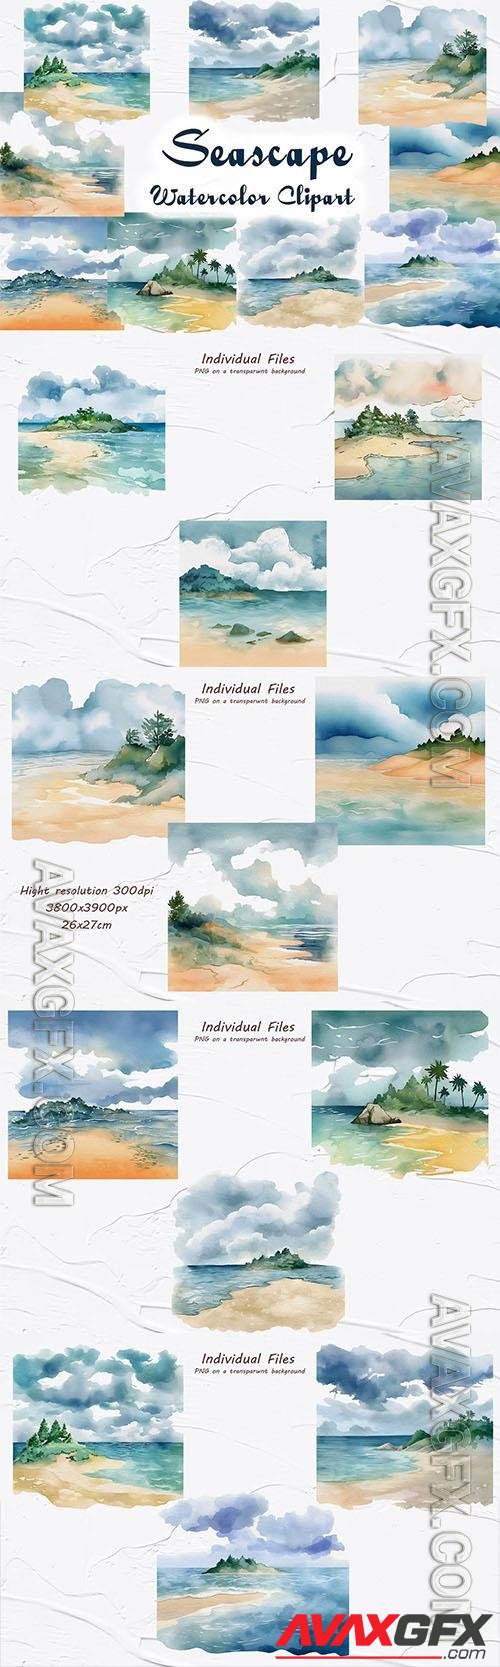 Watercolor clipart with seascapes, sea, beach [PNG]